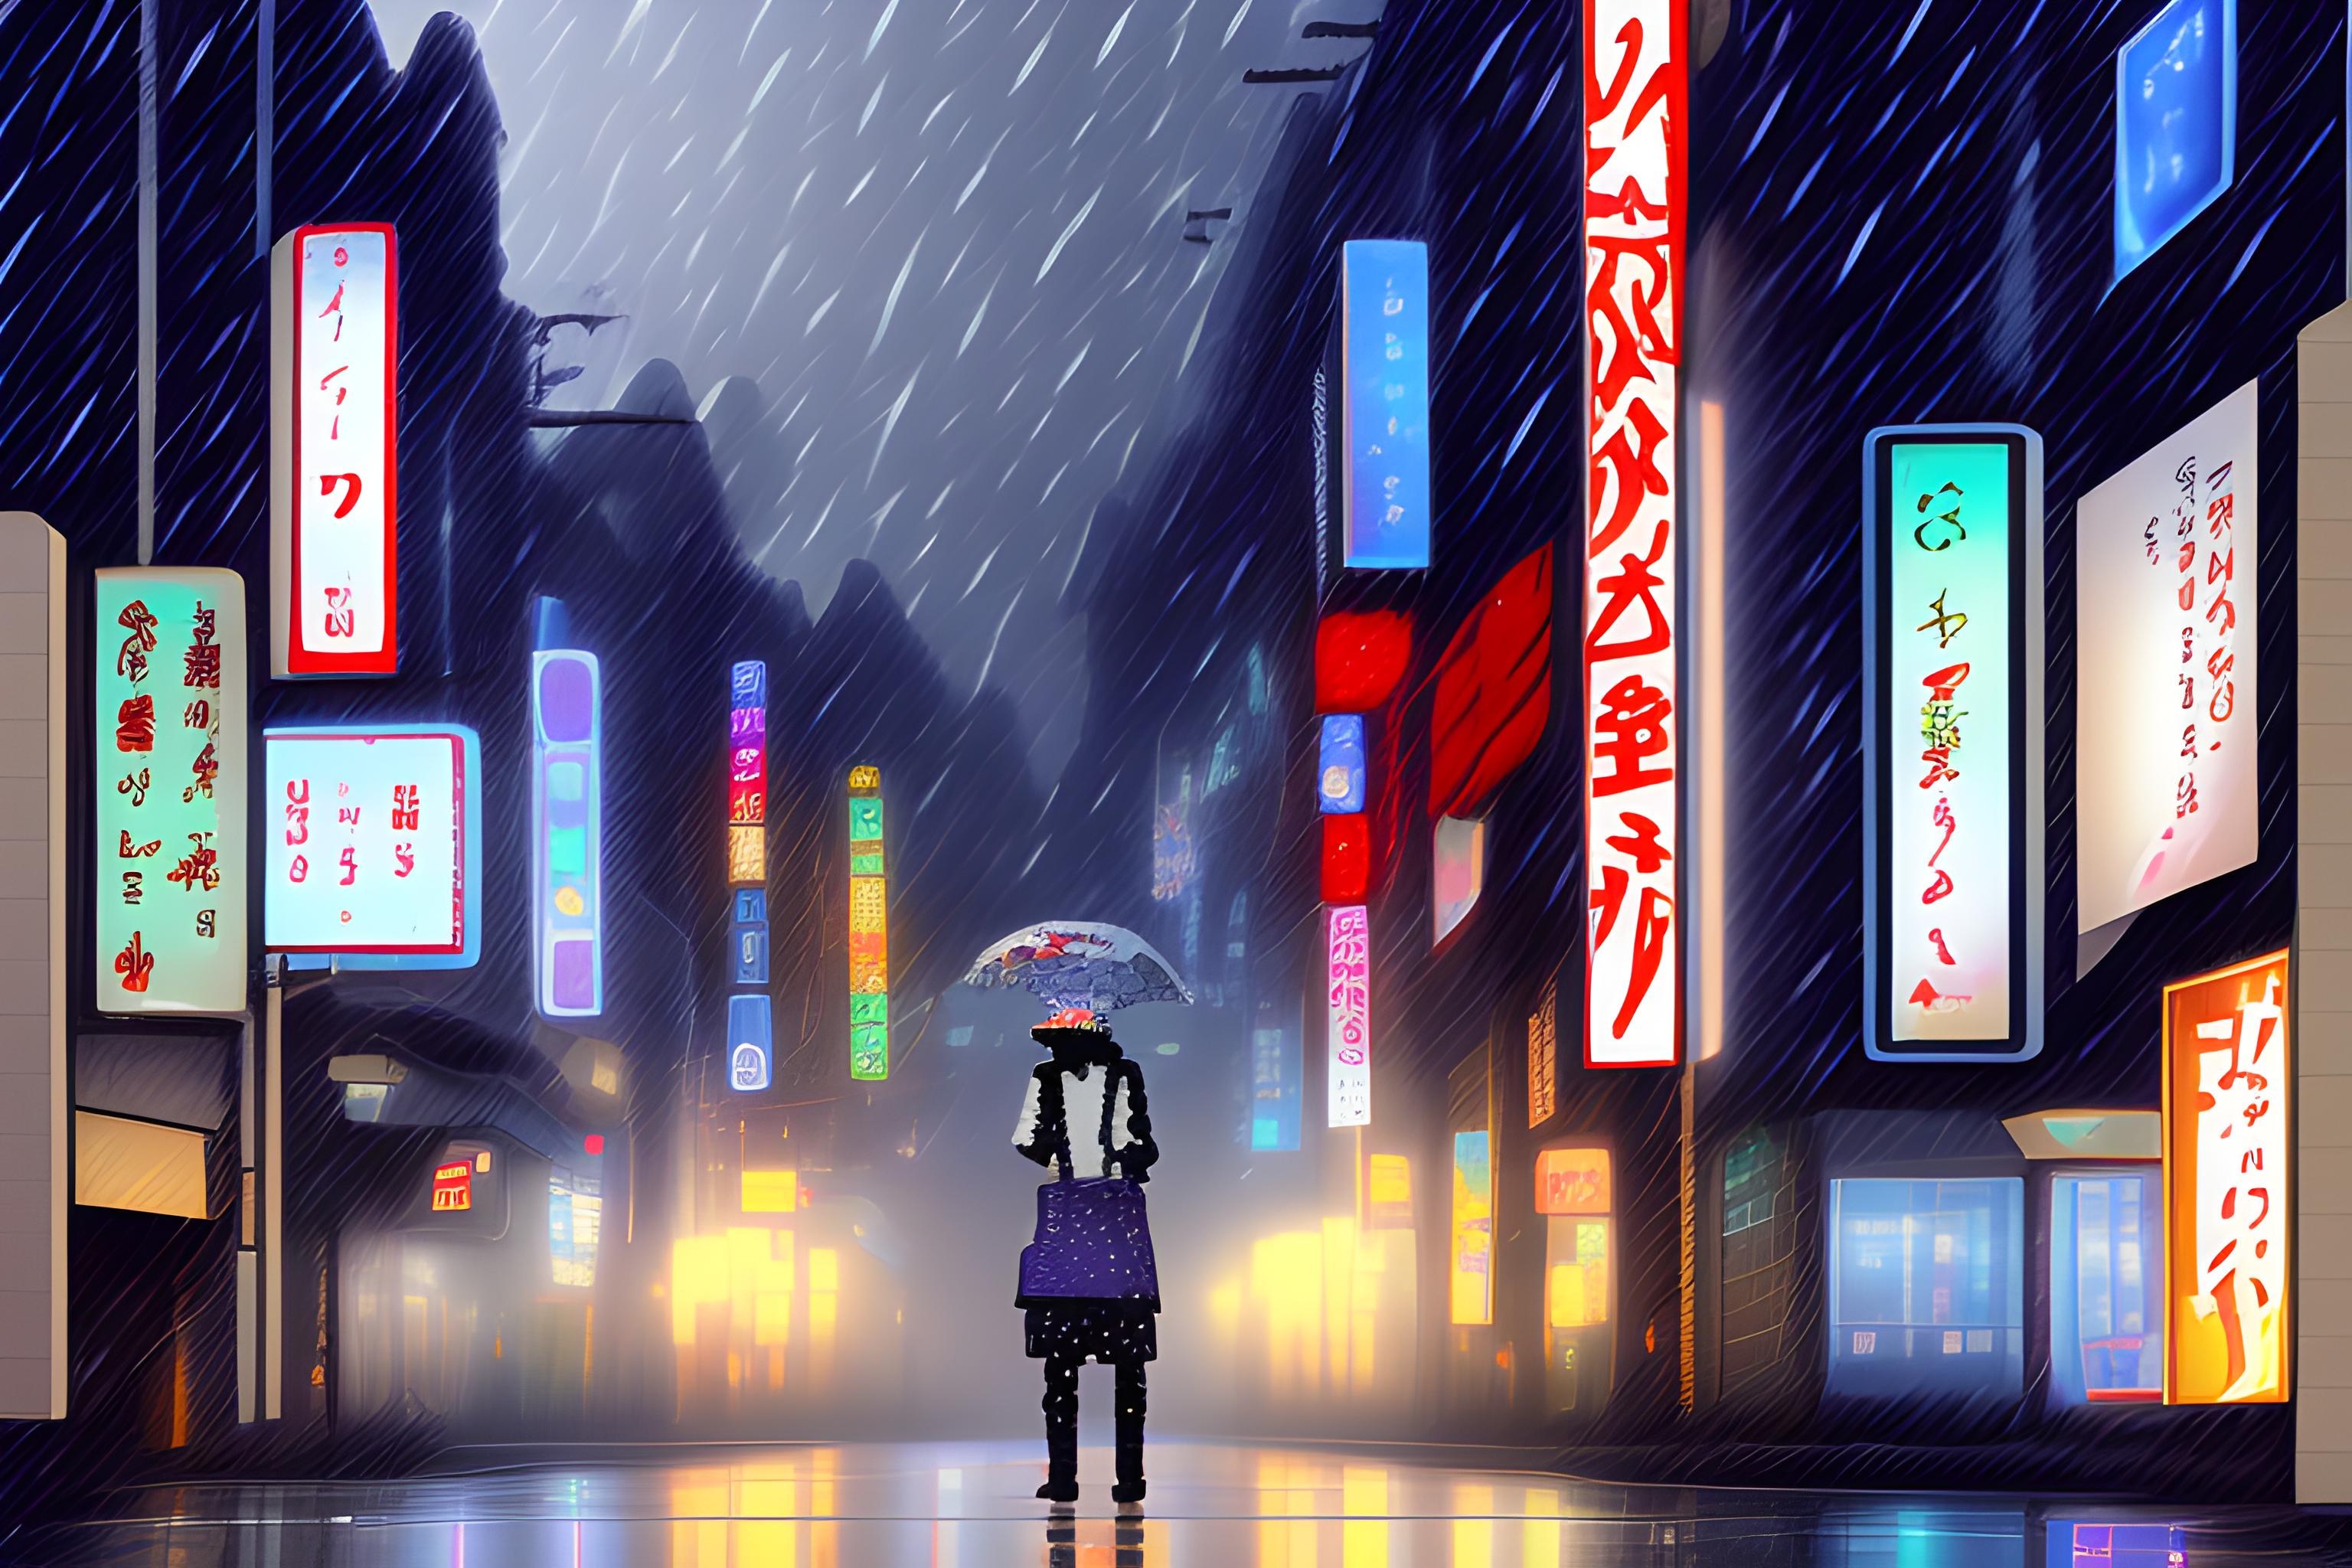 Tokyo in the evening in the rain, in pixel art and with a cat